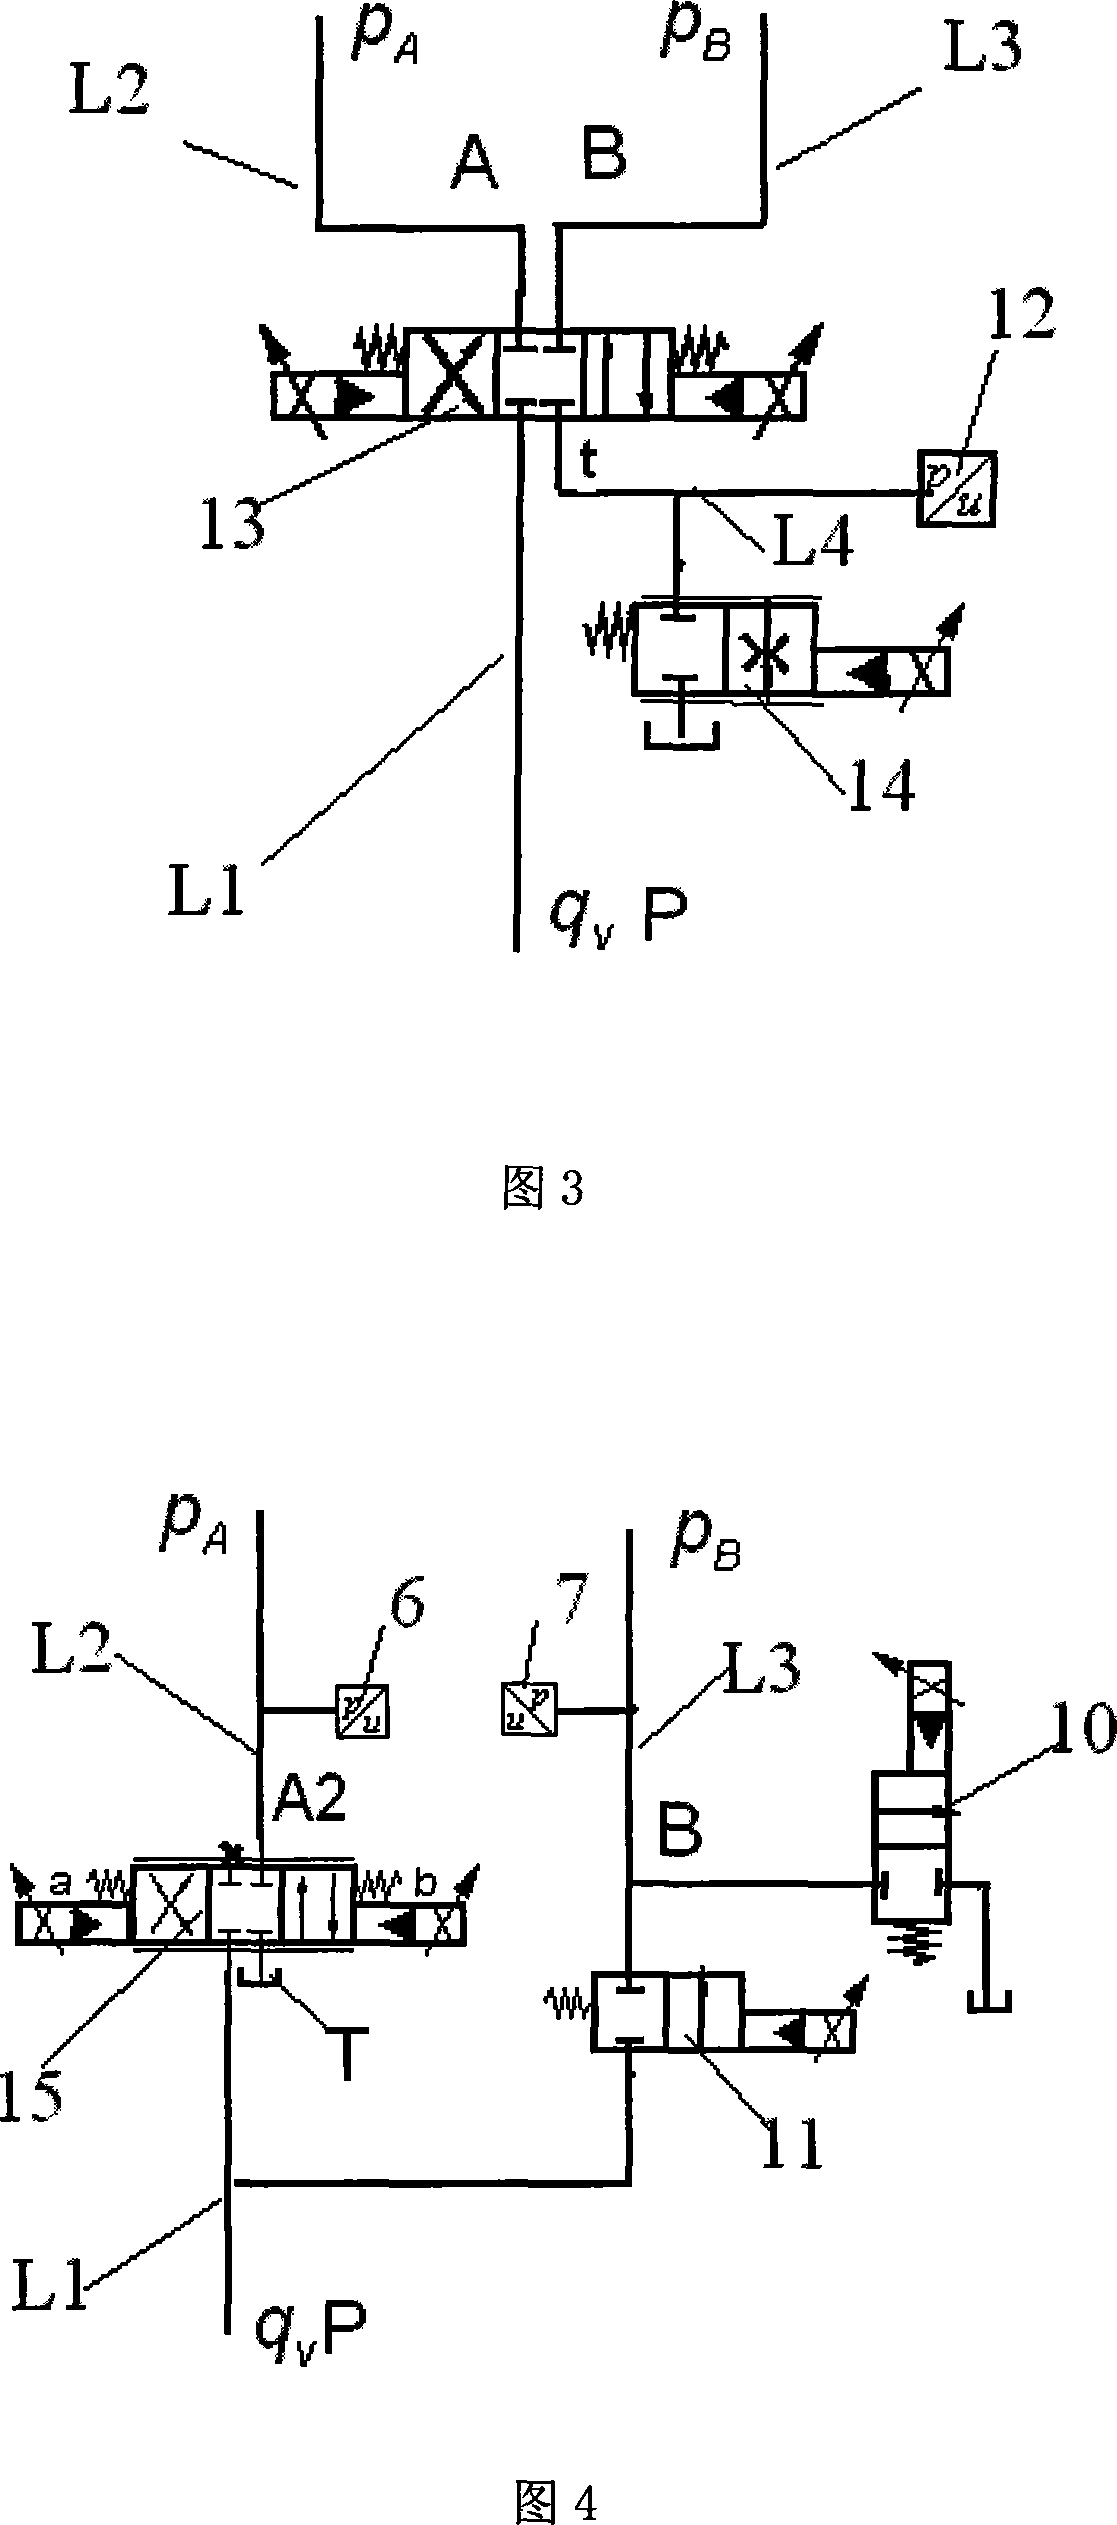 Independent control electrohydraulic system of oil inlet and outlet with pump valve composite flux matched